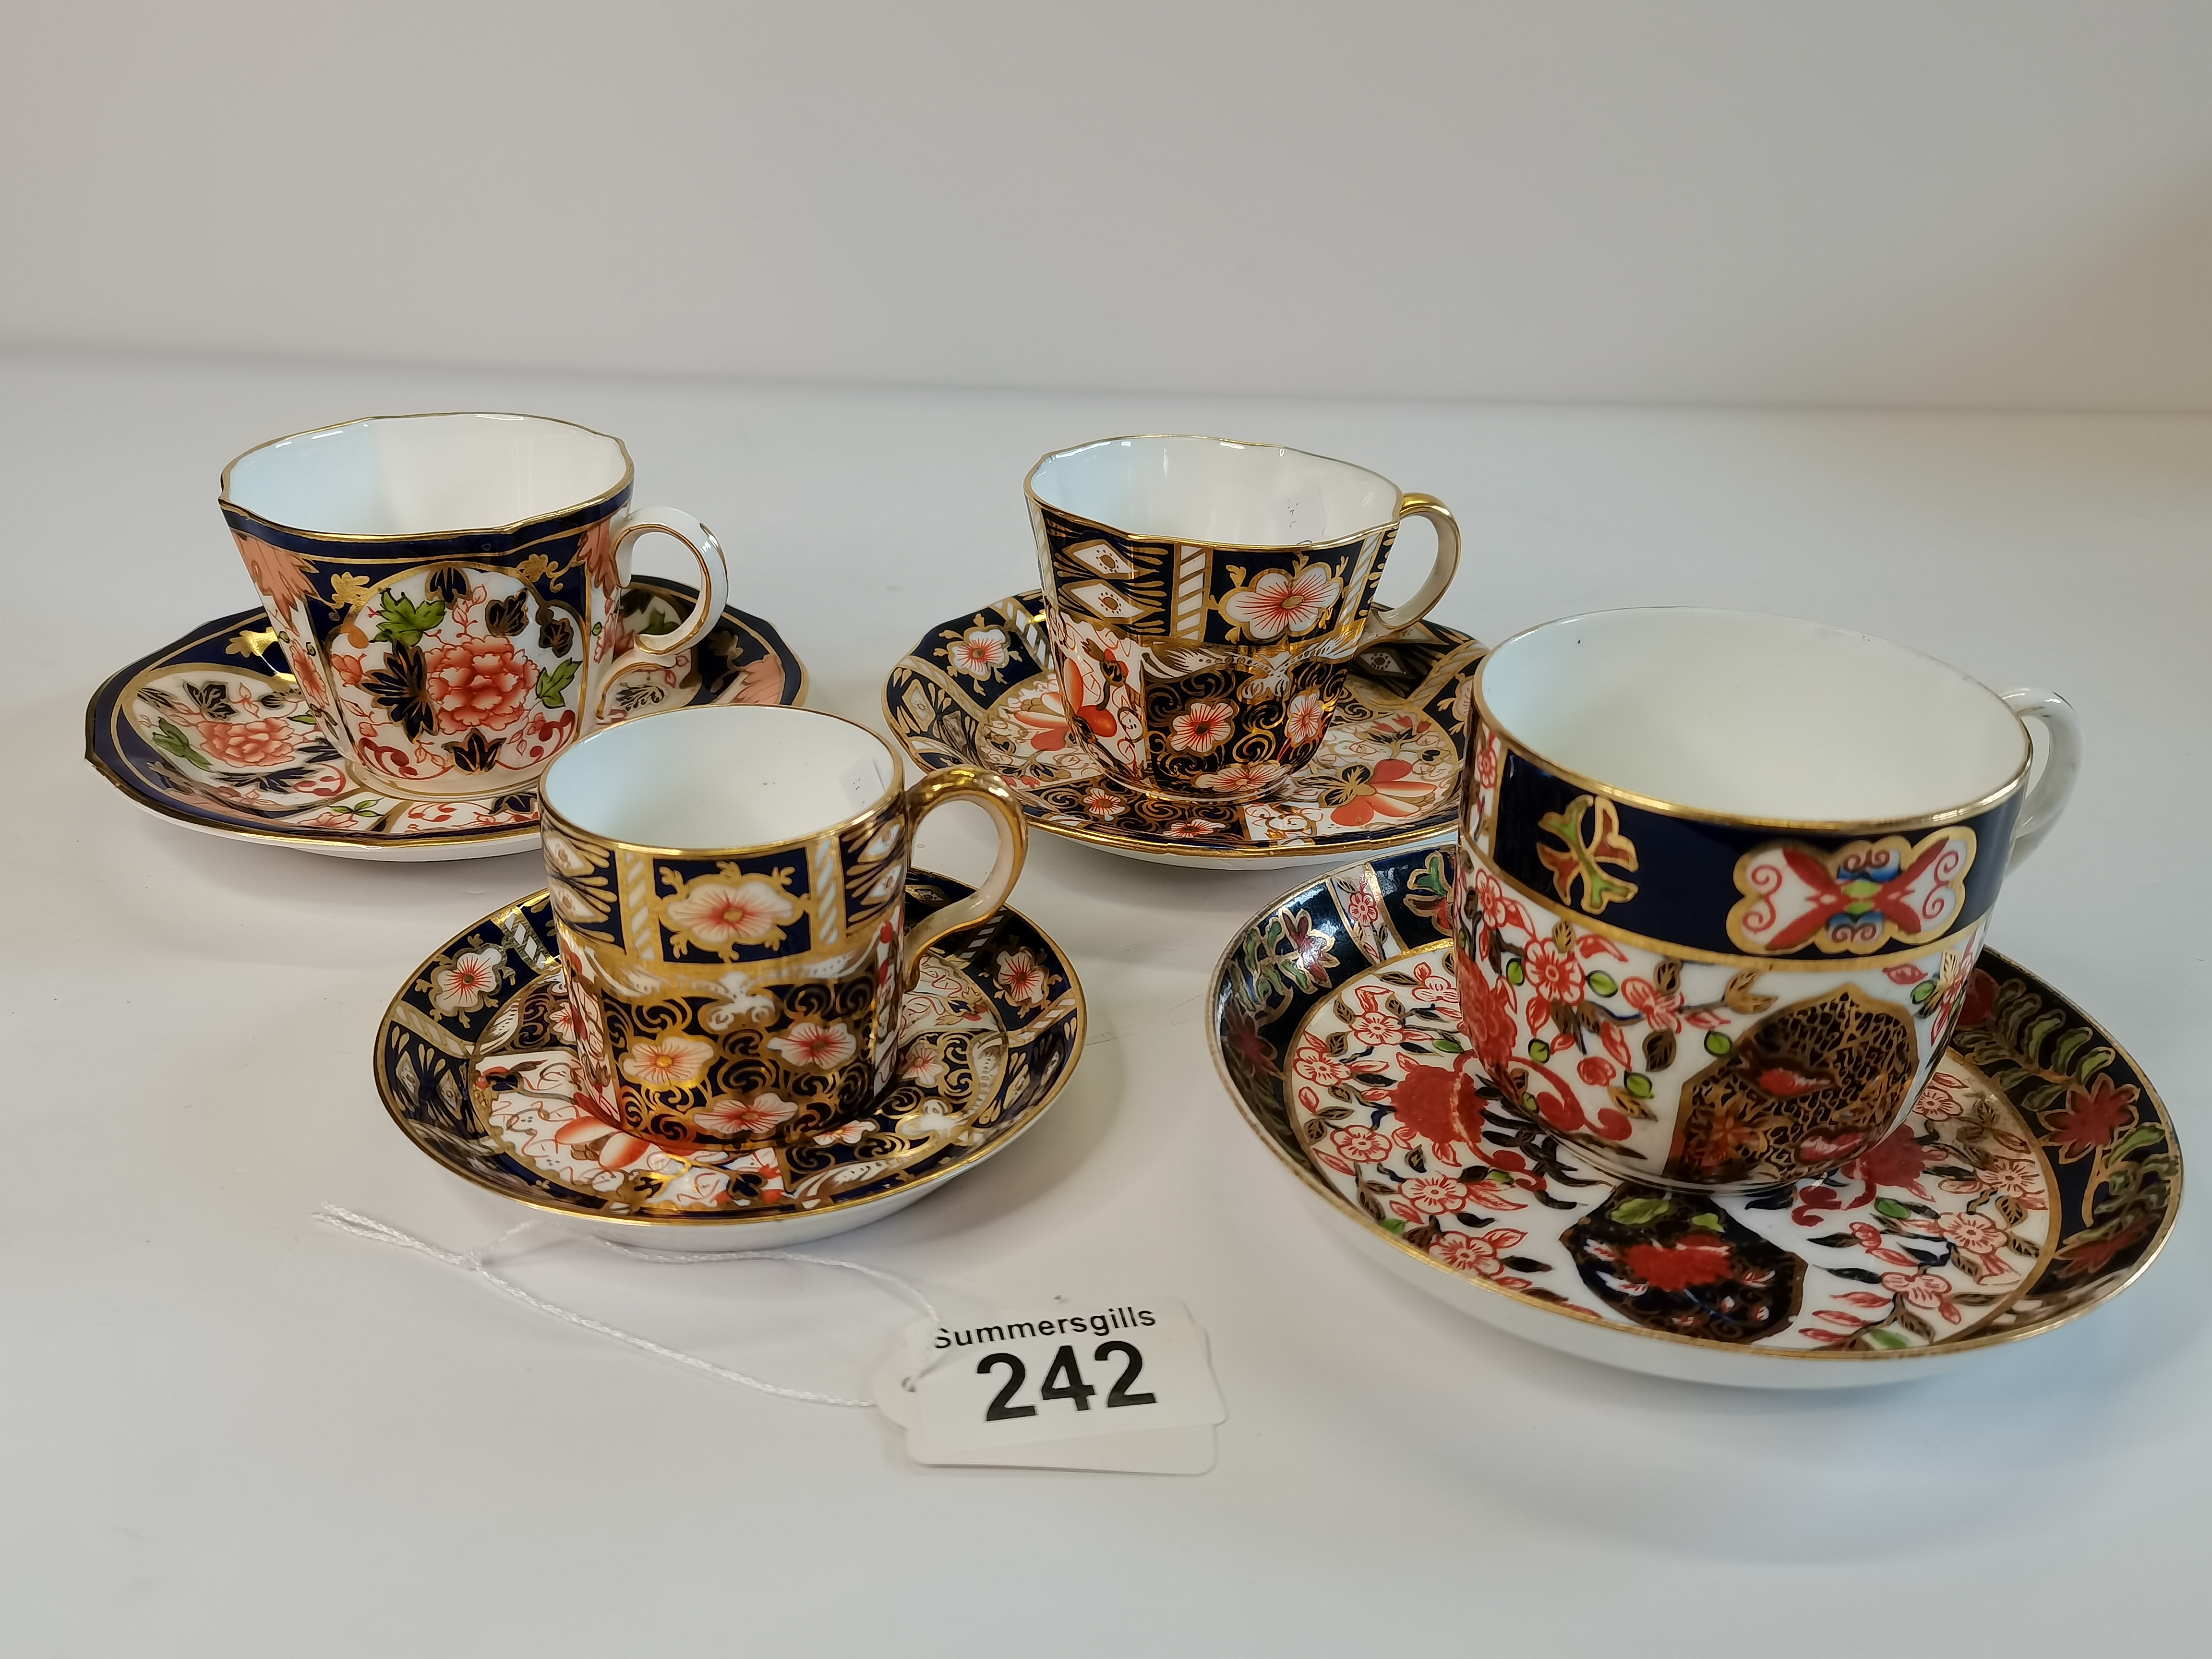 x4 Crown Derby cups and saucers